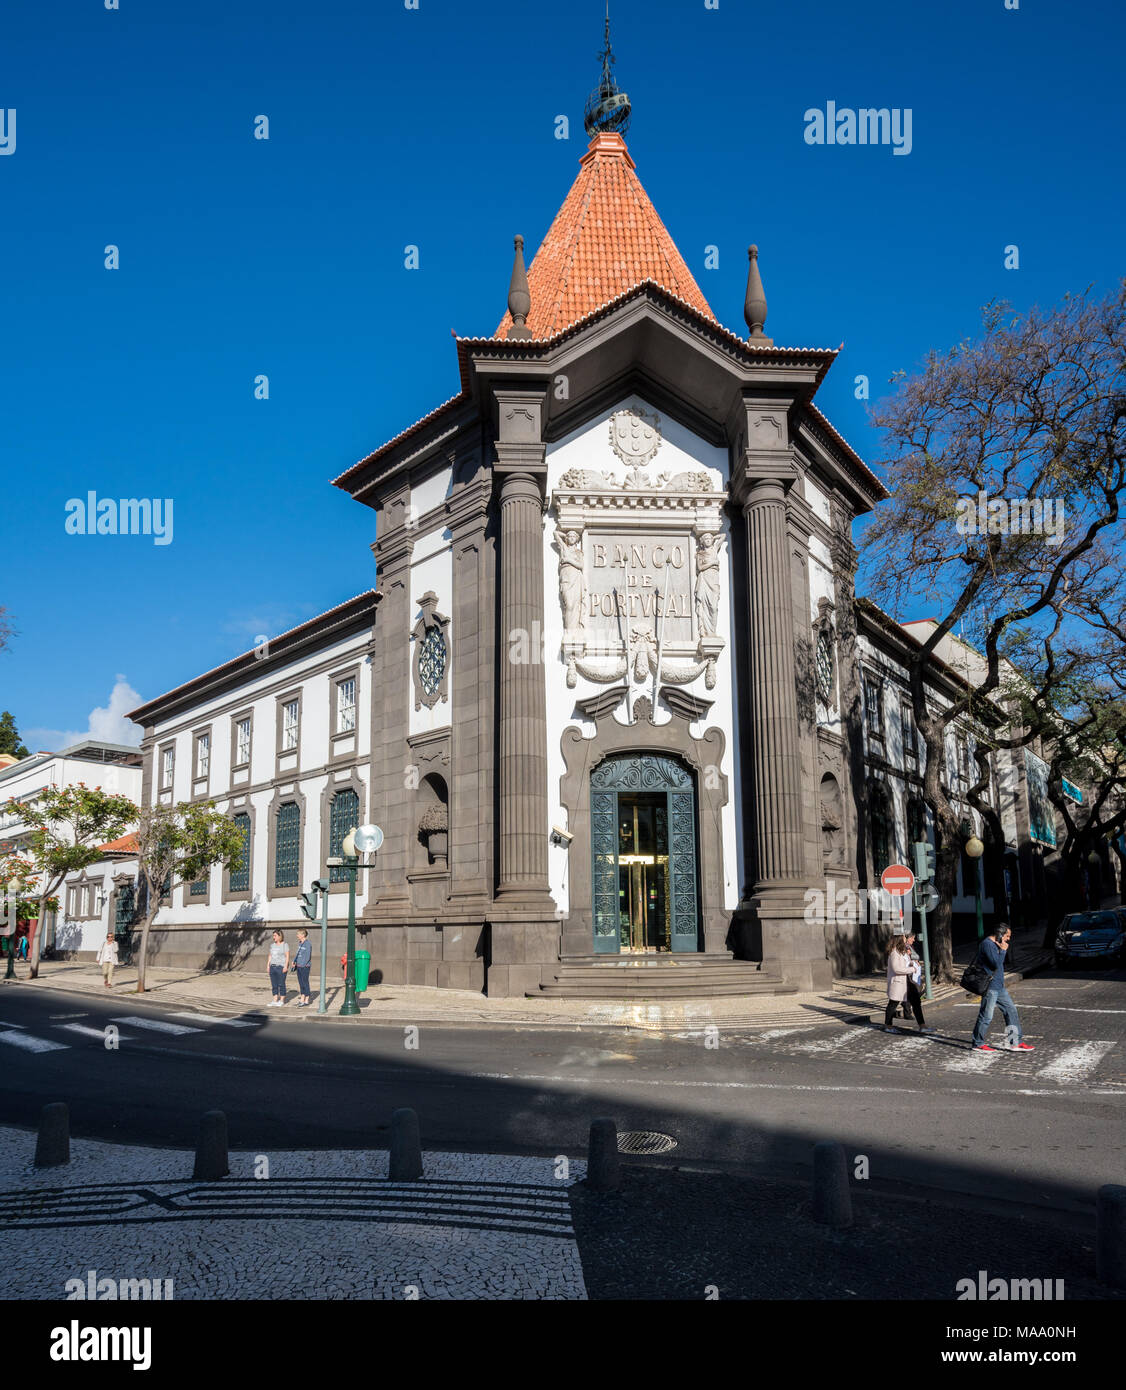 Banco do Portugal branch in Funchal Madiera Stock Photo